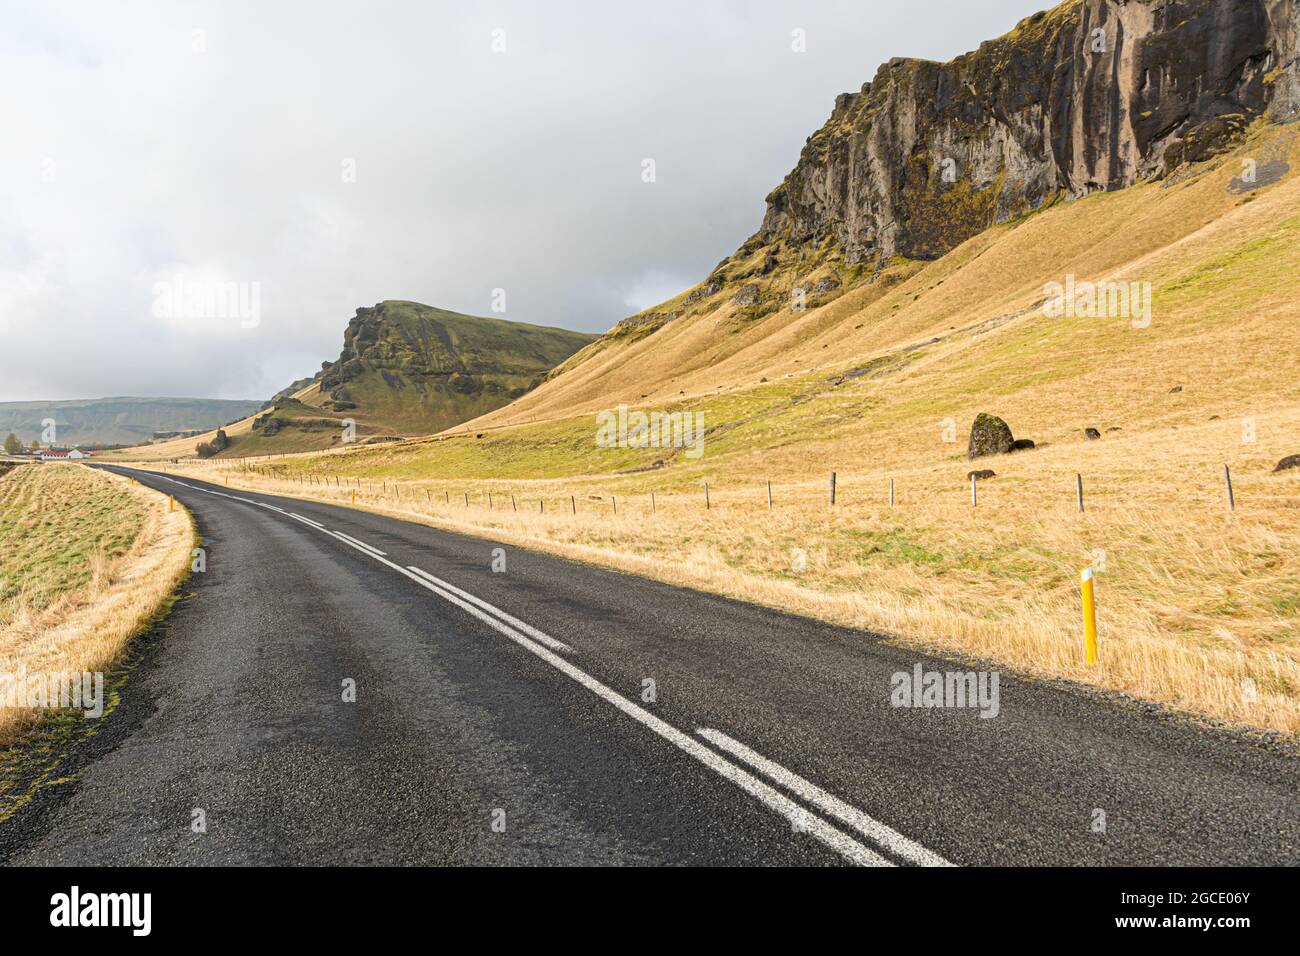 A natural view of a paved country road on the side of rocky mountains in Iceland Stock Photo